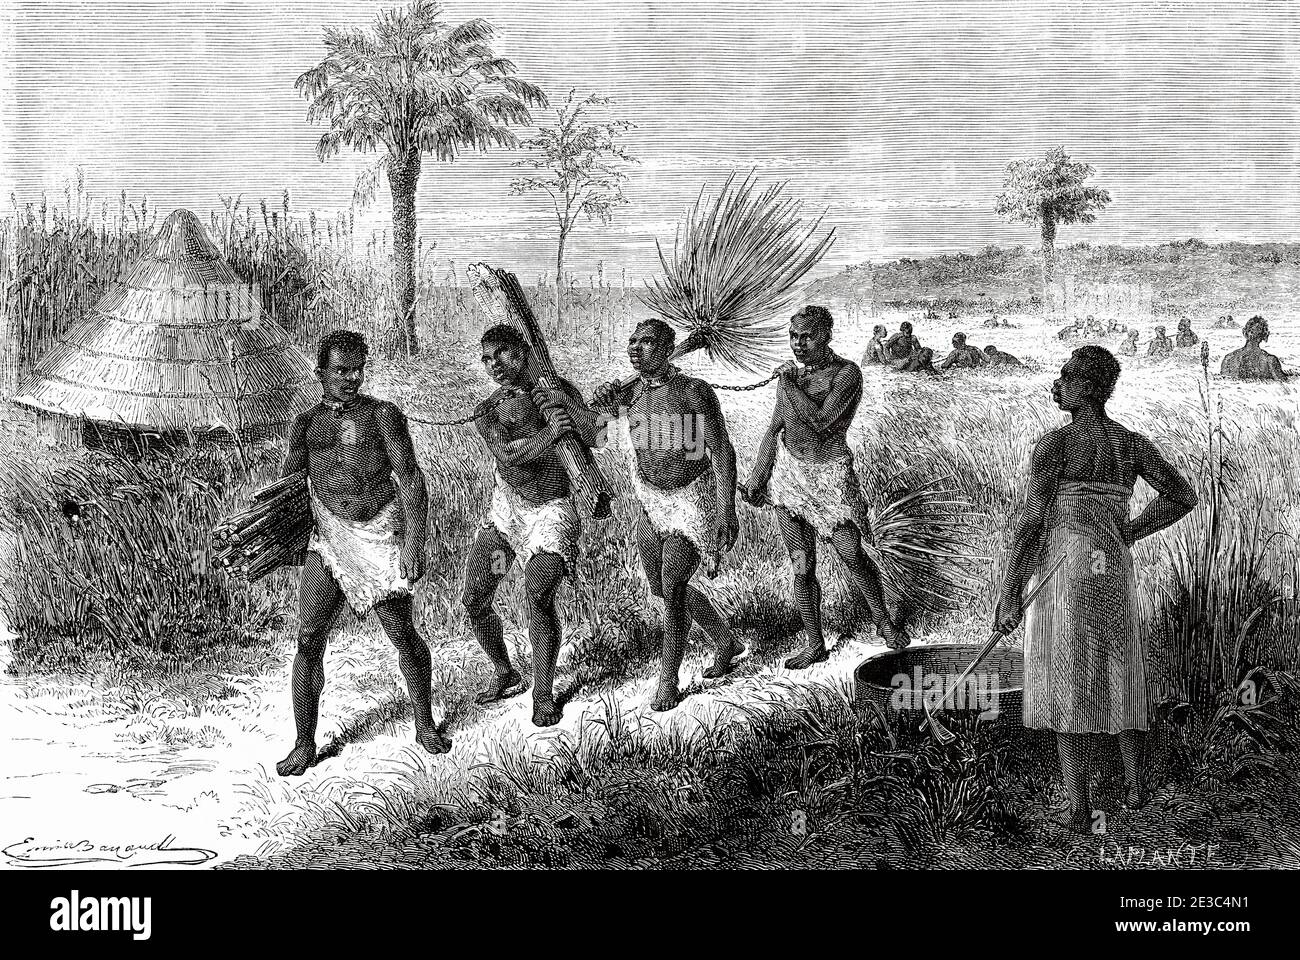 Slaves working in the Unyamwezi region, Tanzania, Africa. Old XIX century engraved from Le Tour du Monde 1864 Stock Photo